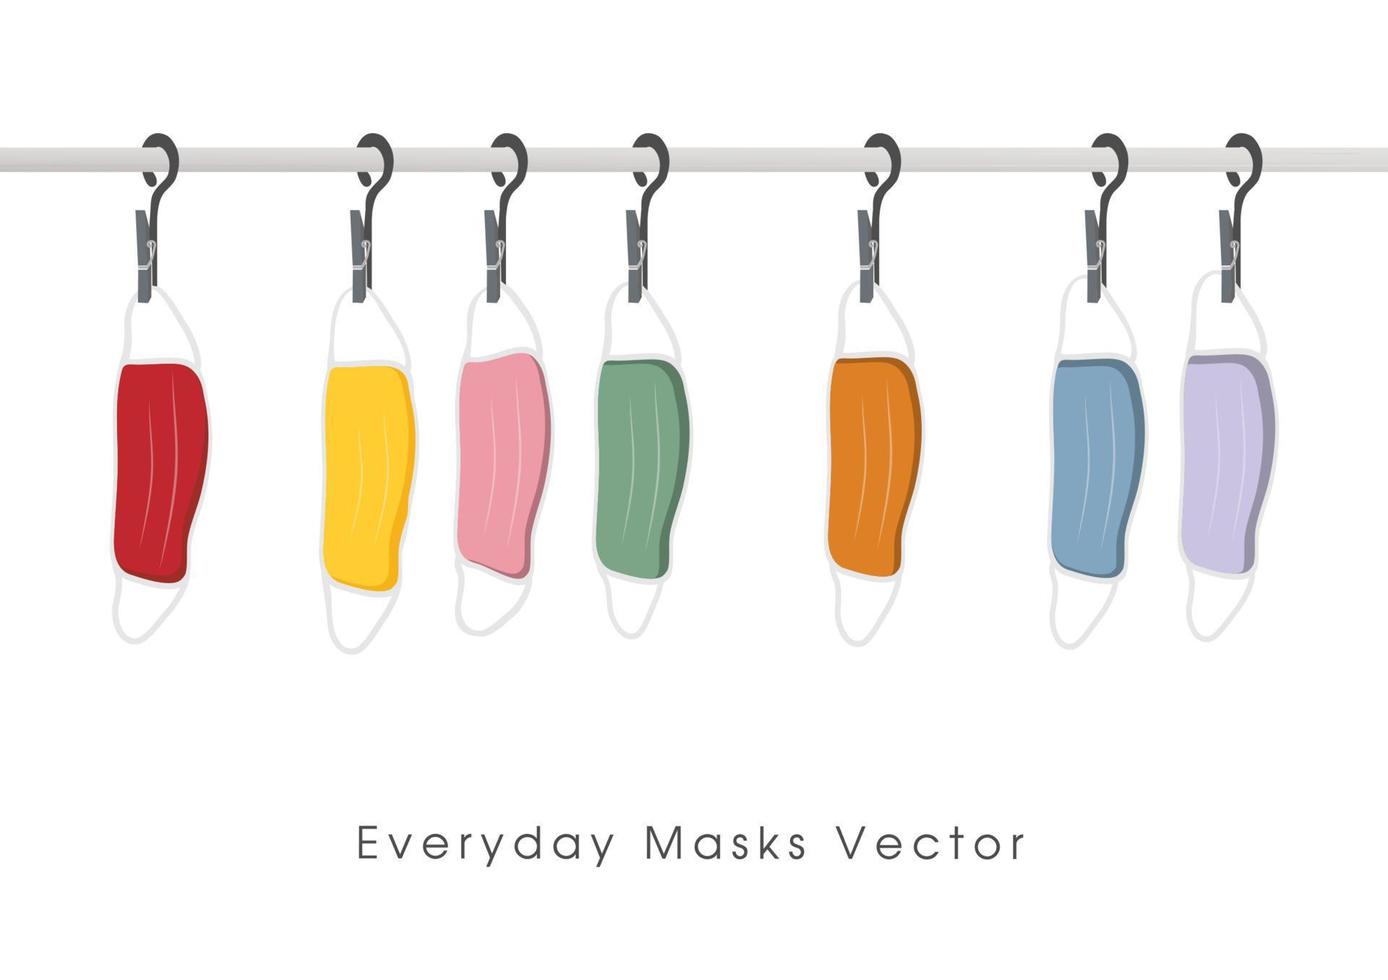 A colorful masks hung on a clothesline vector isolated on white background